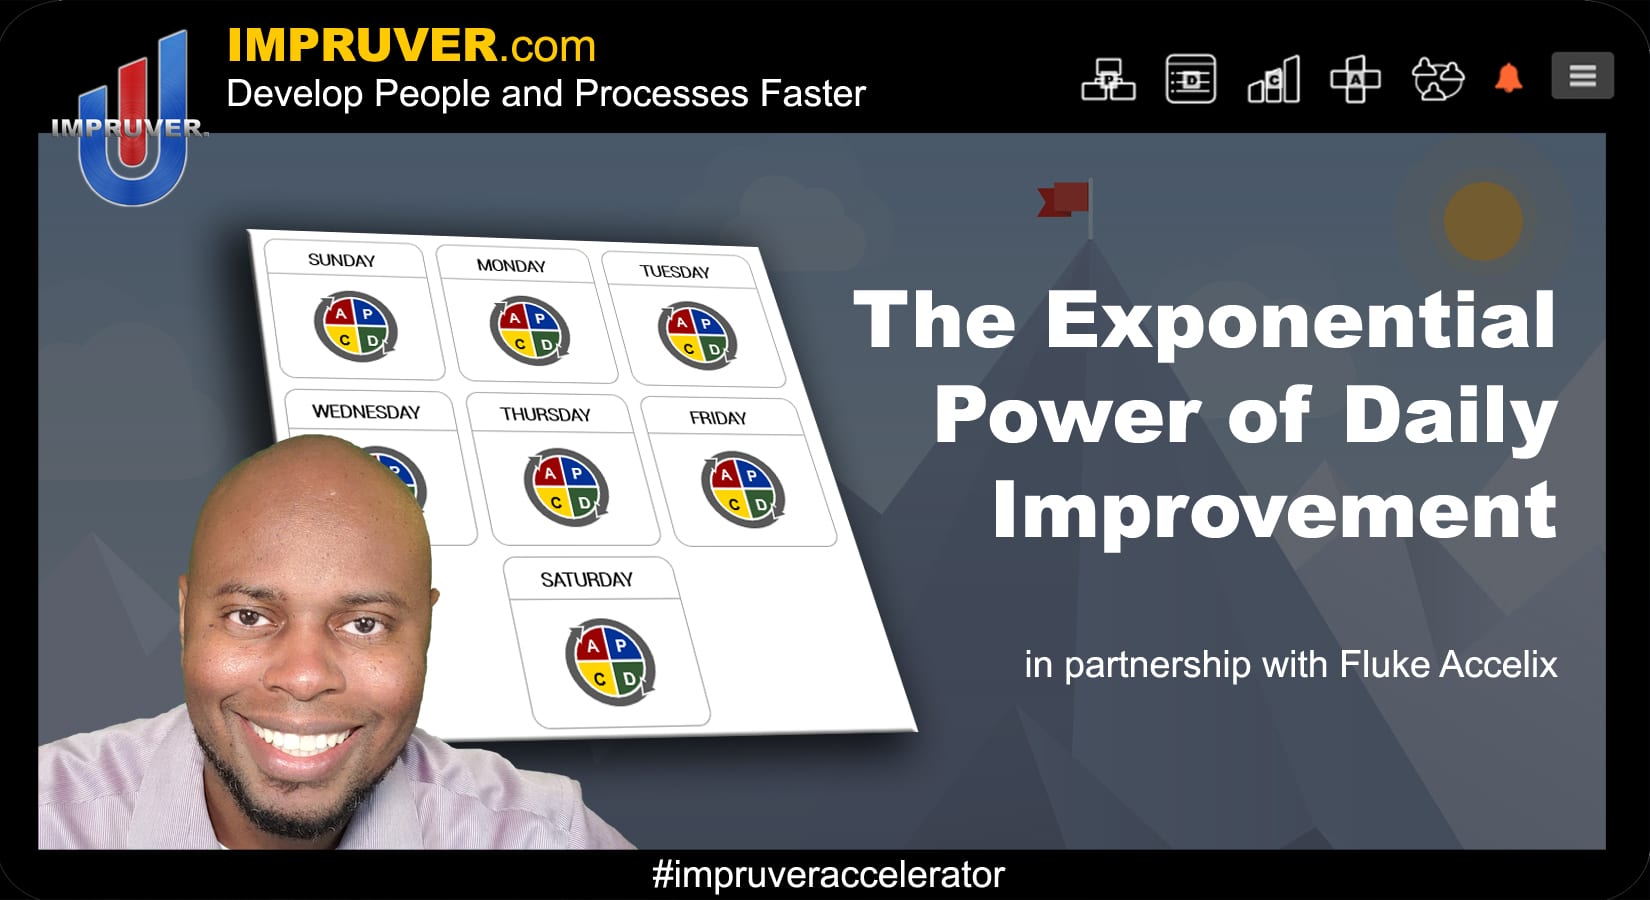 The exponential power of daily improvement - Impruver